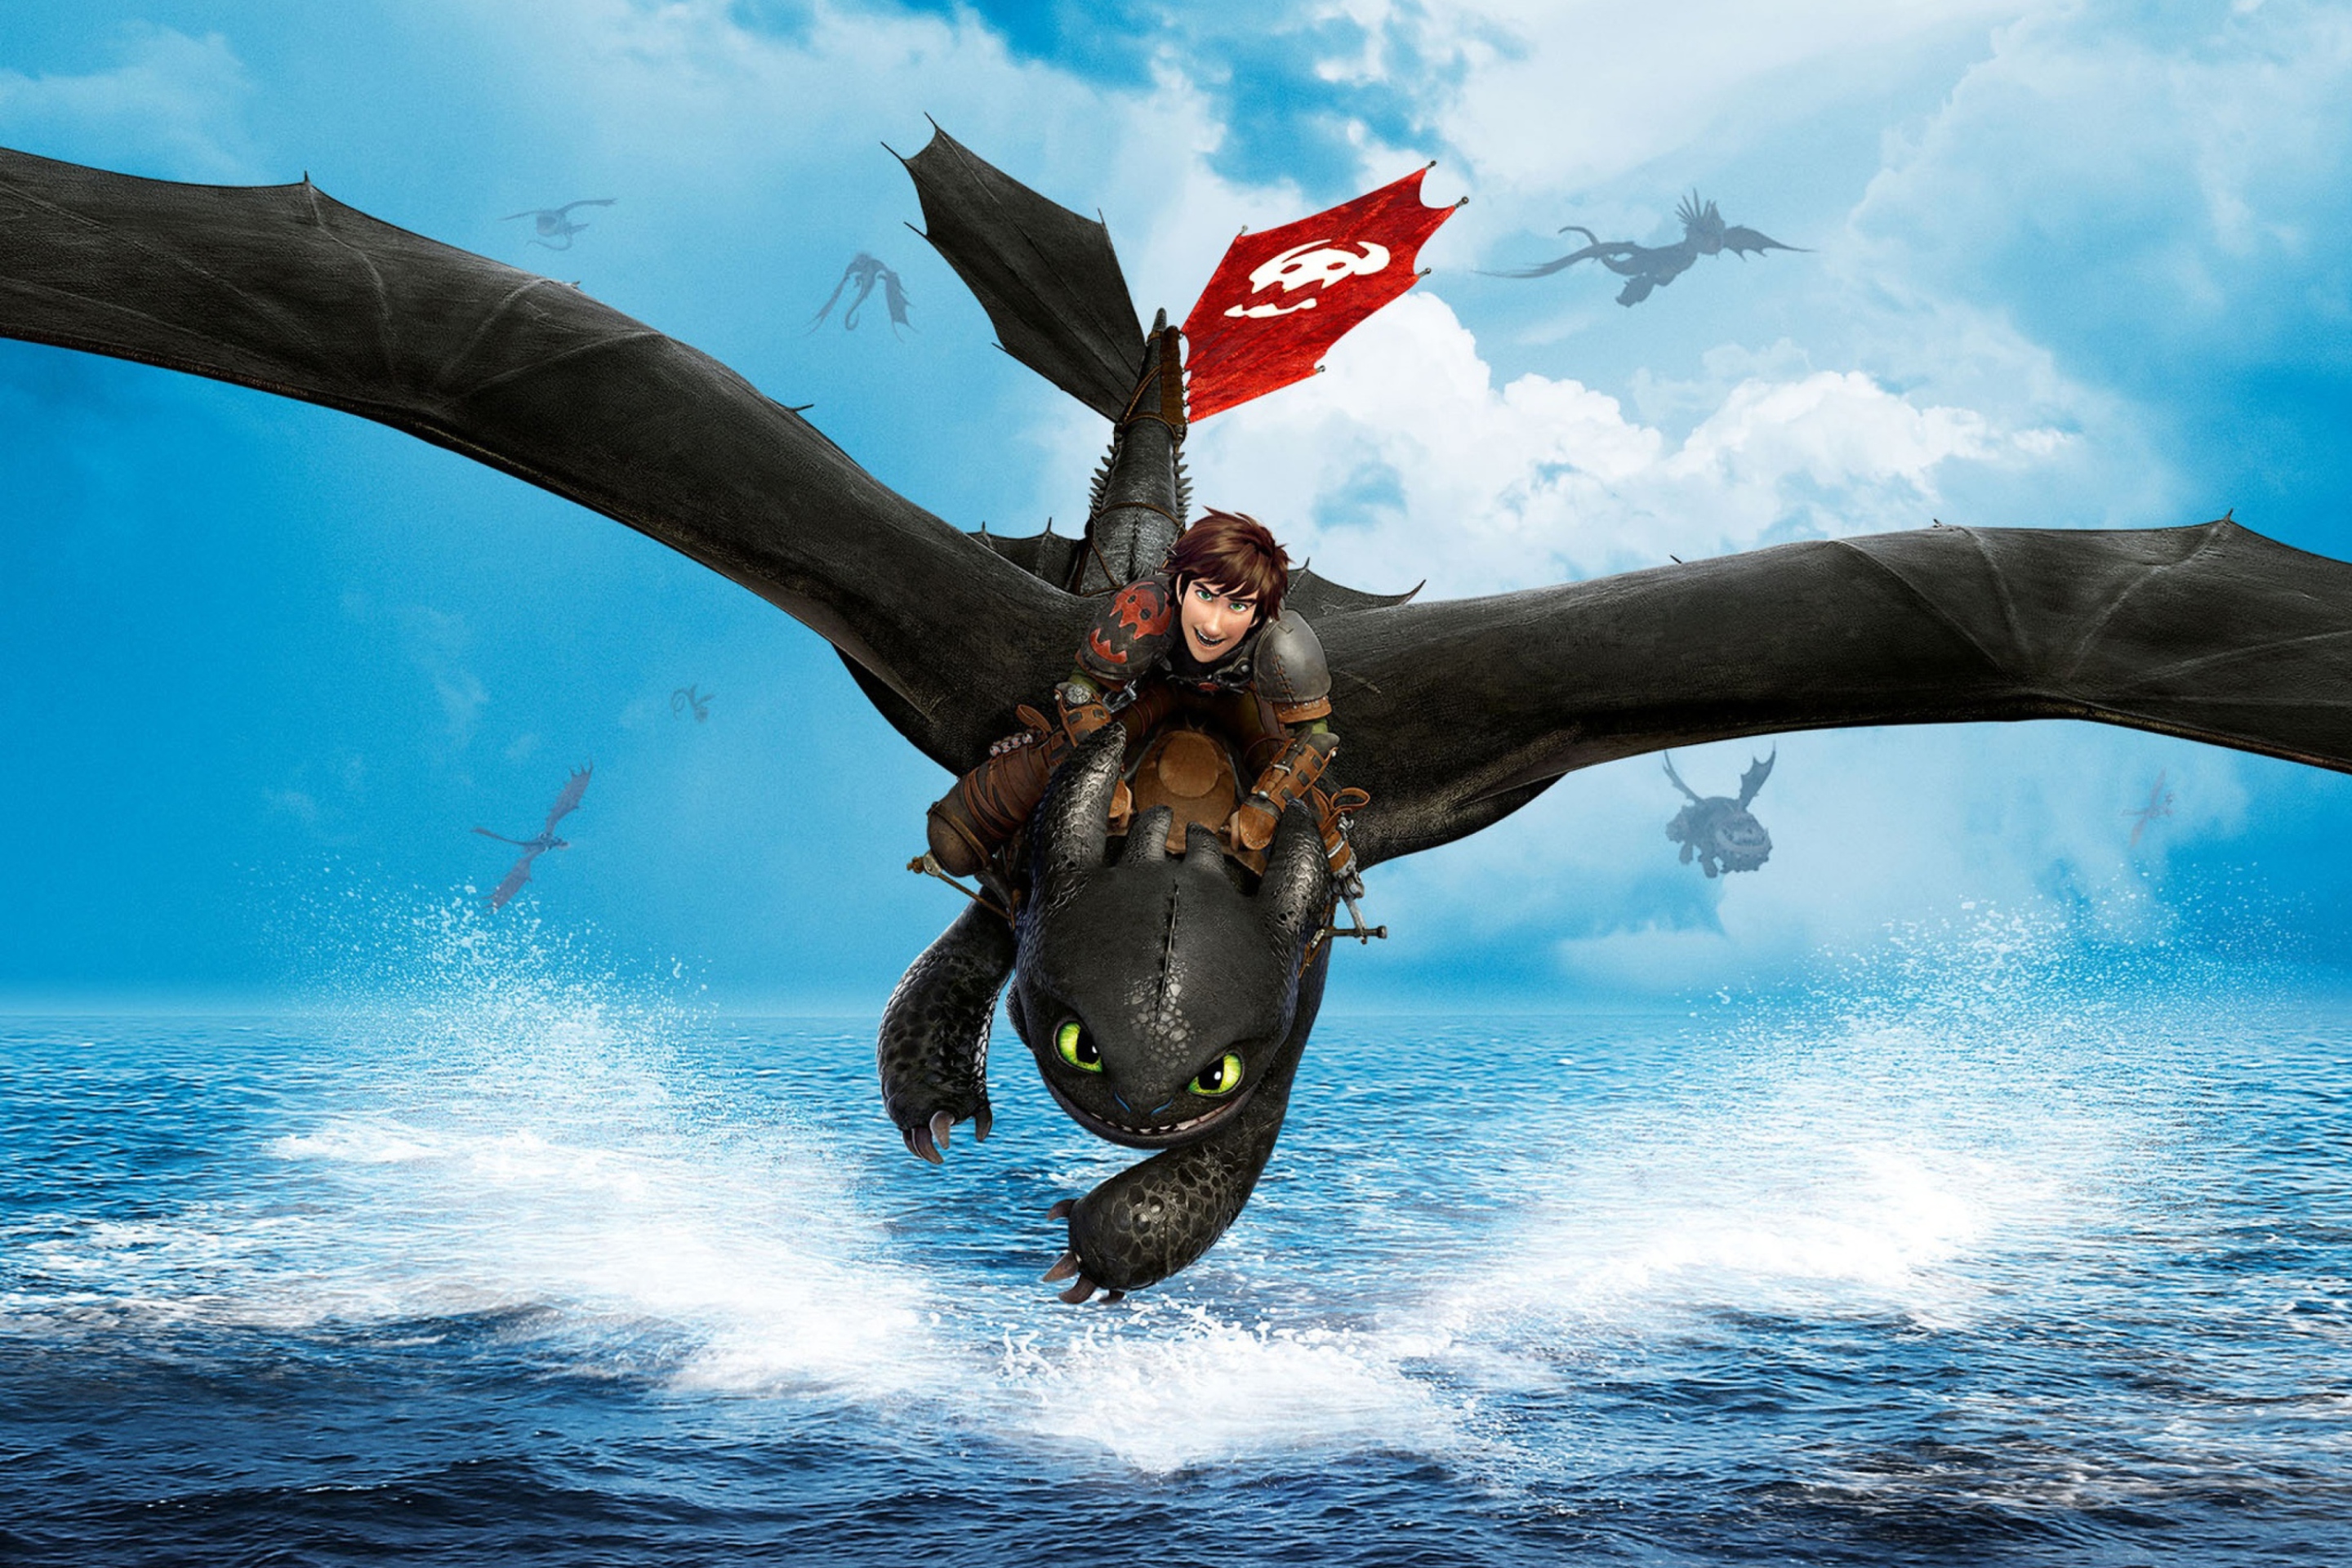 2014 How To Train Your Dragon wallpaper 2880x1920